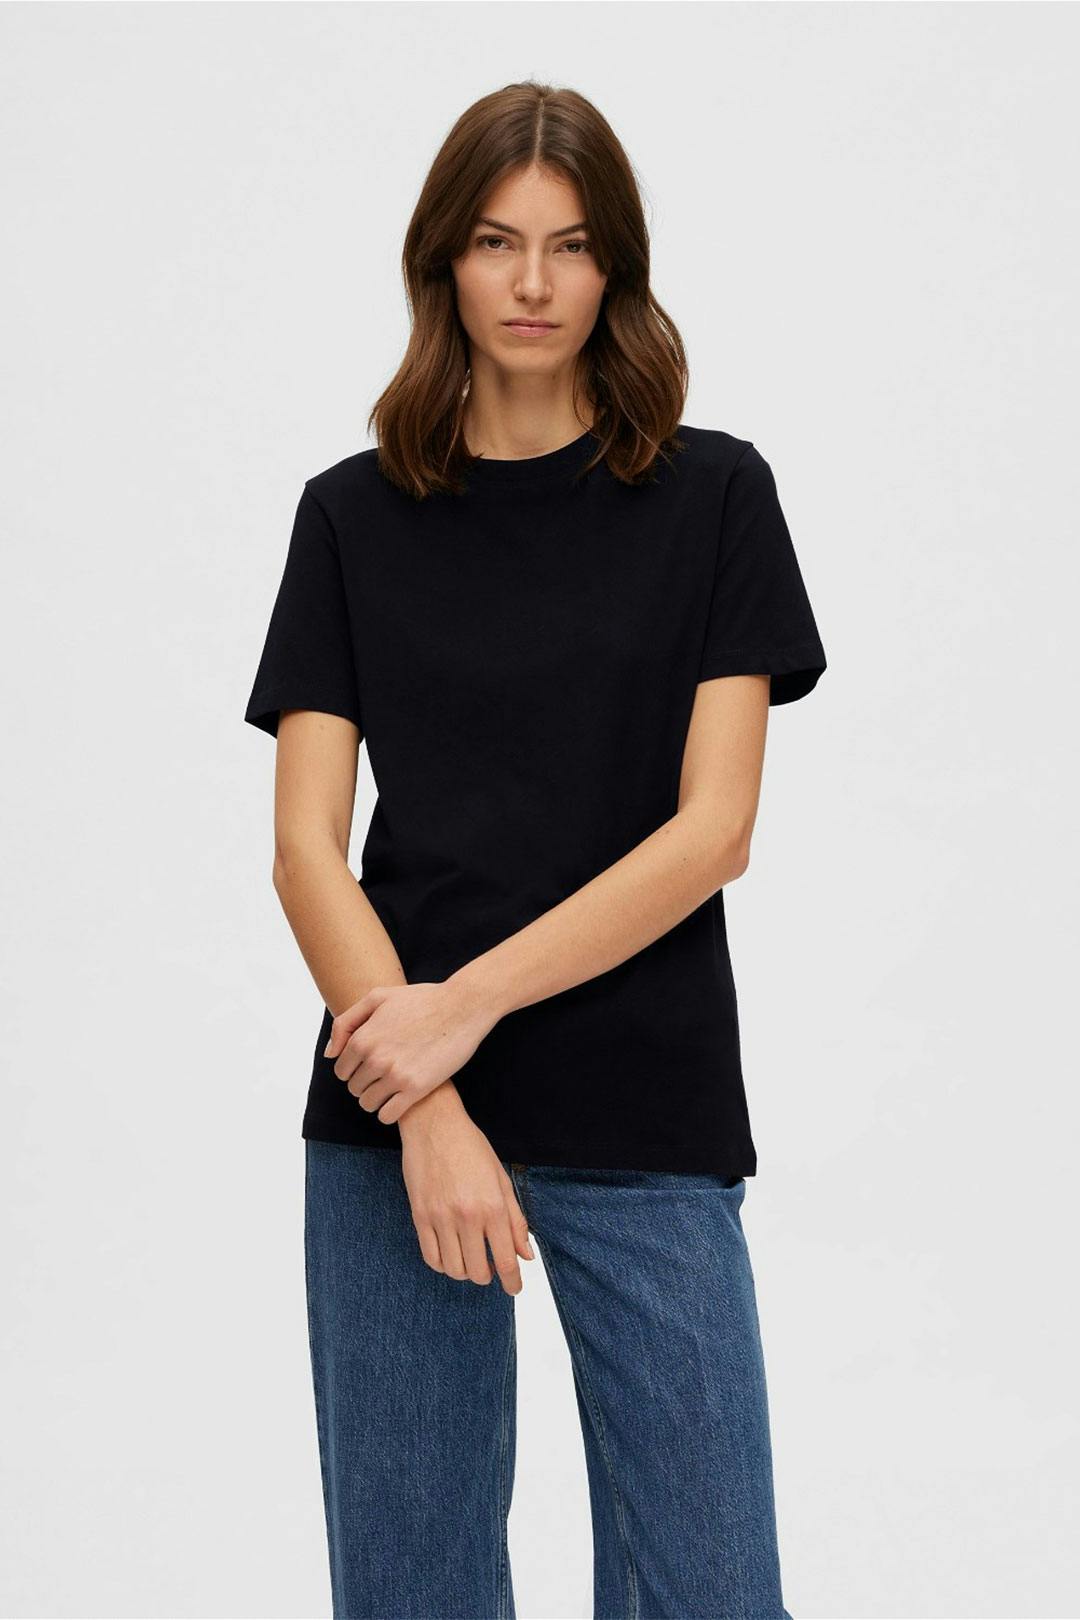 My essential o-neck tee